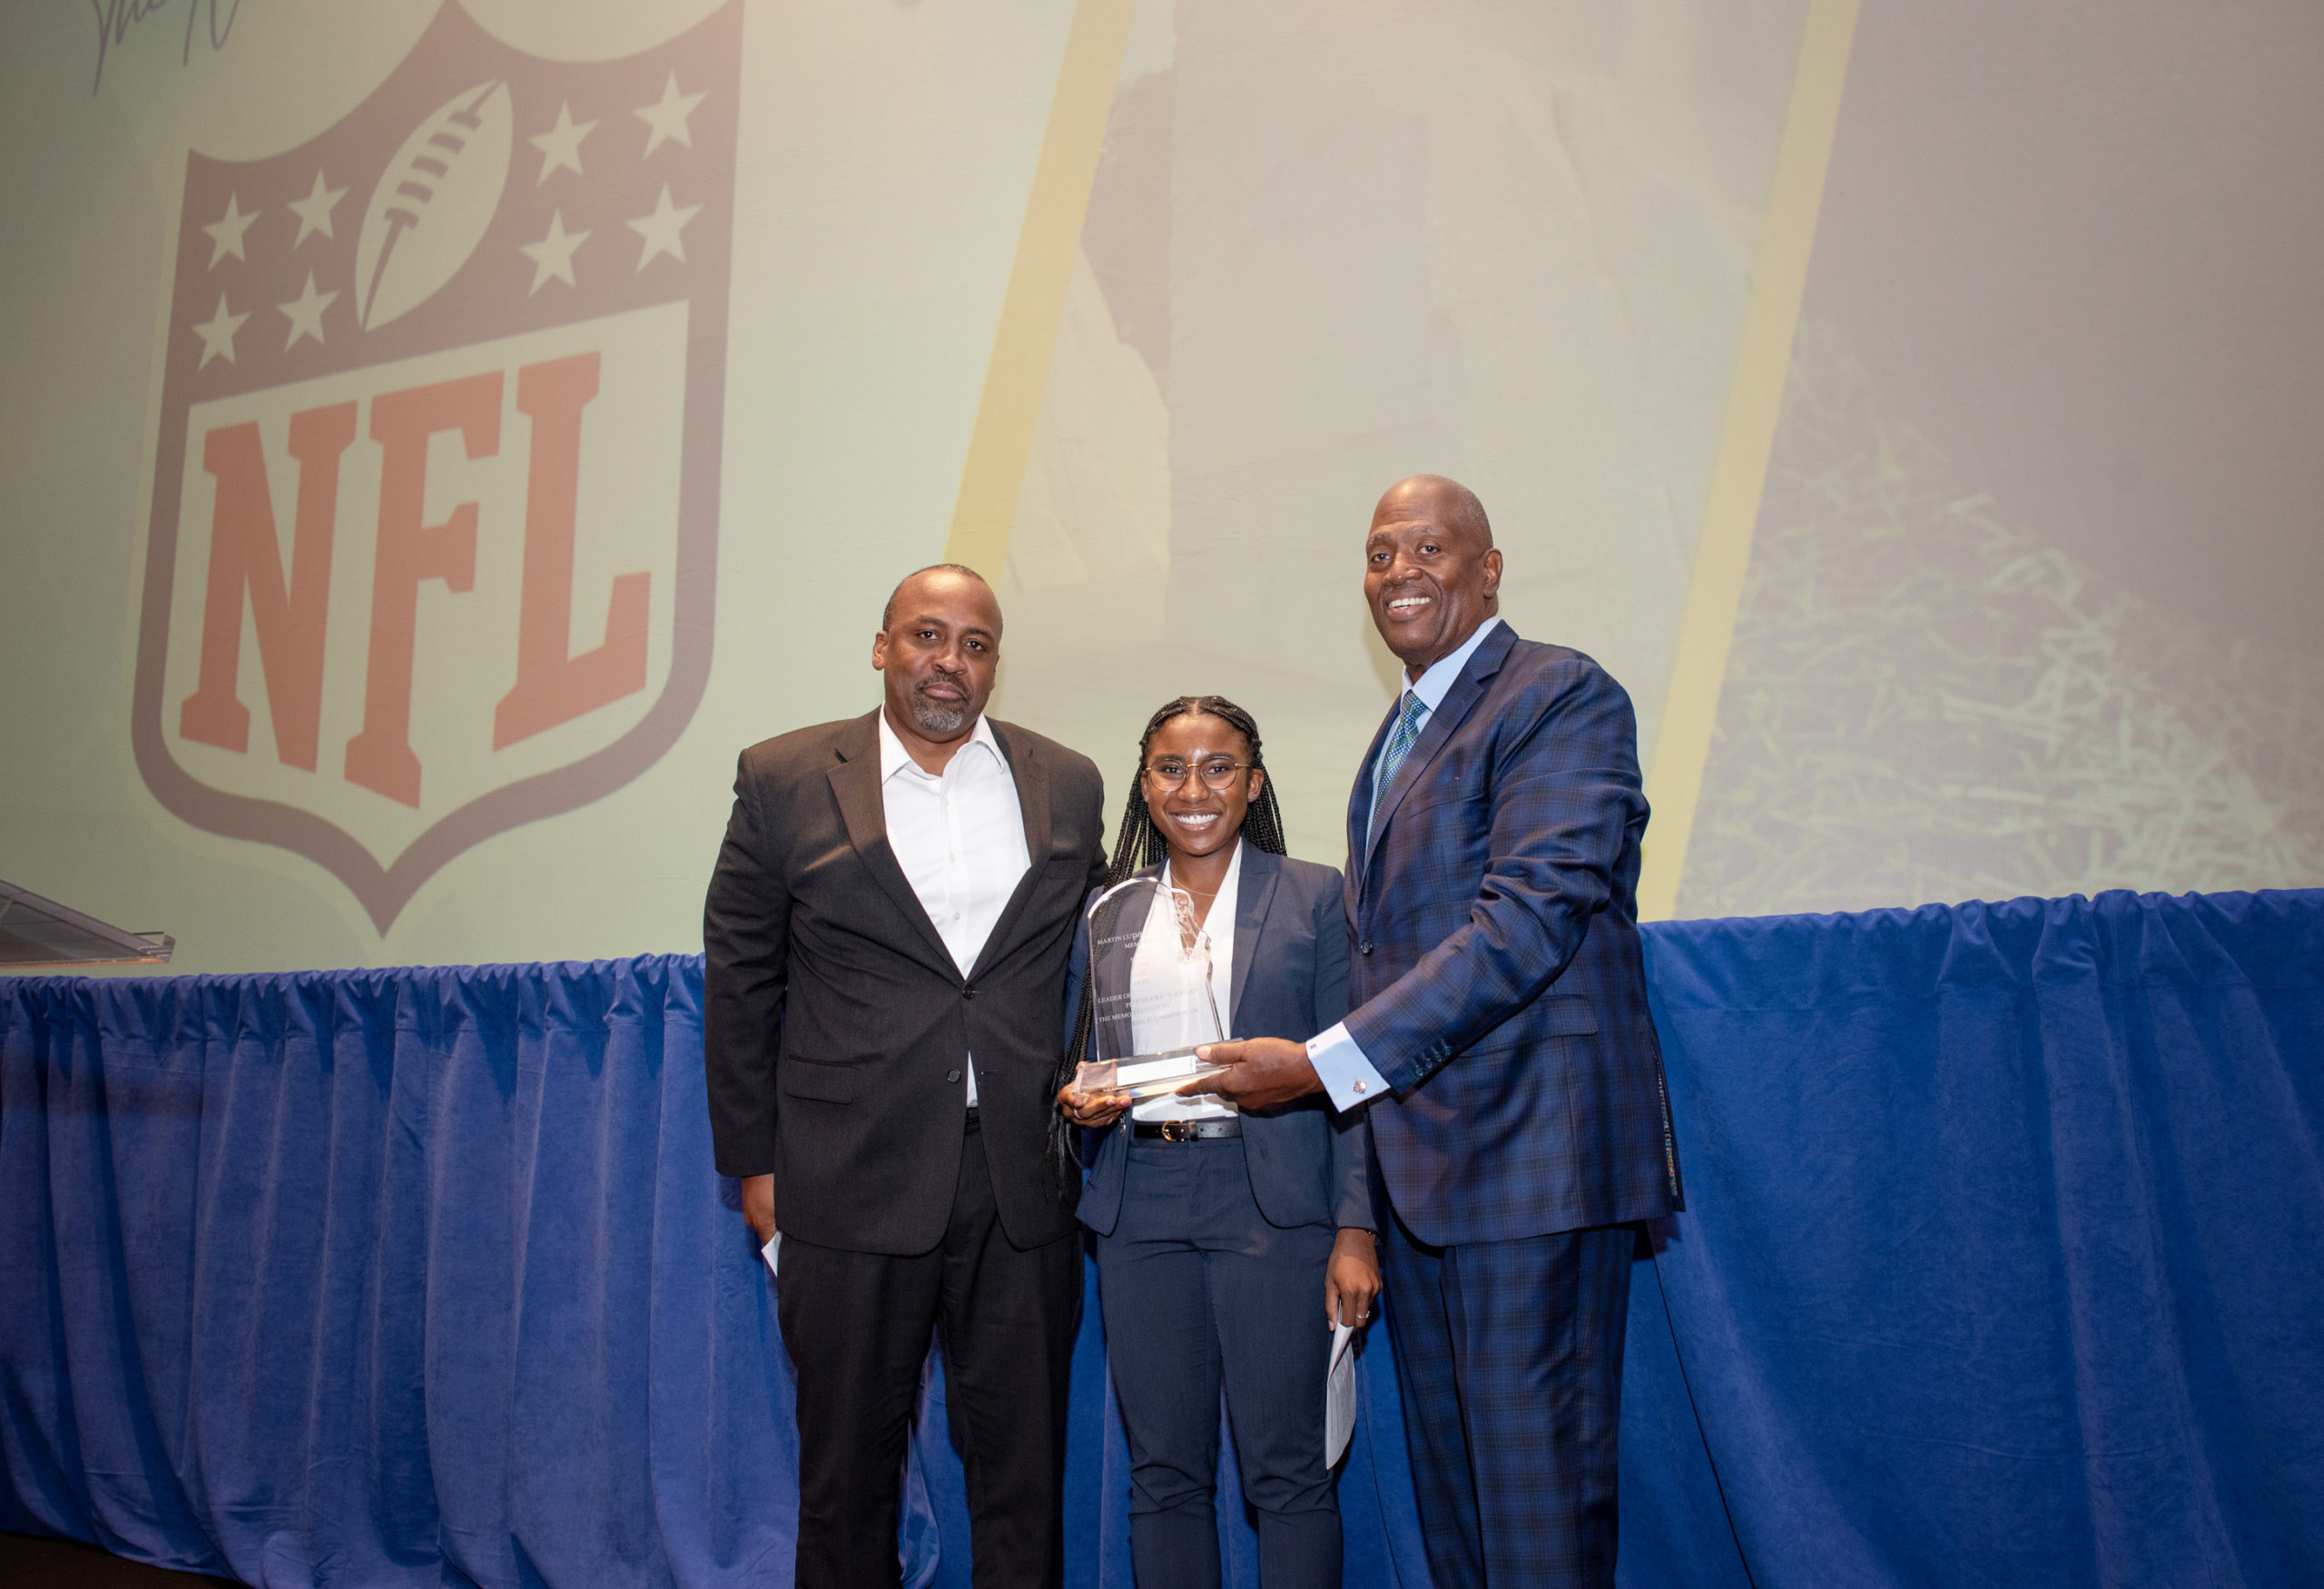 NFL Receives Top Diversity Honor for Front Office and Coaching Accelerator, Says More Work Will Be Done